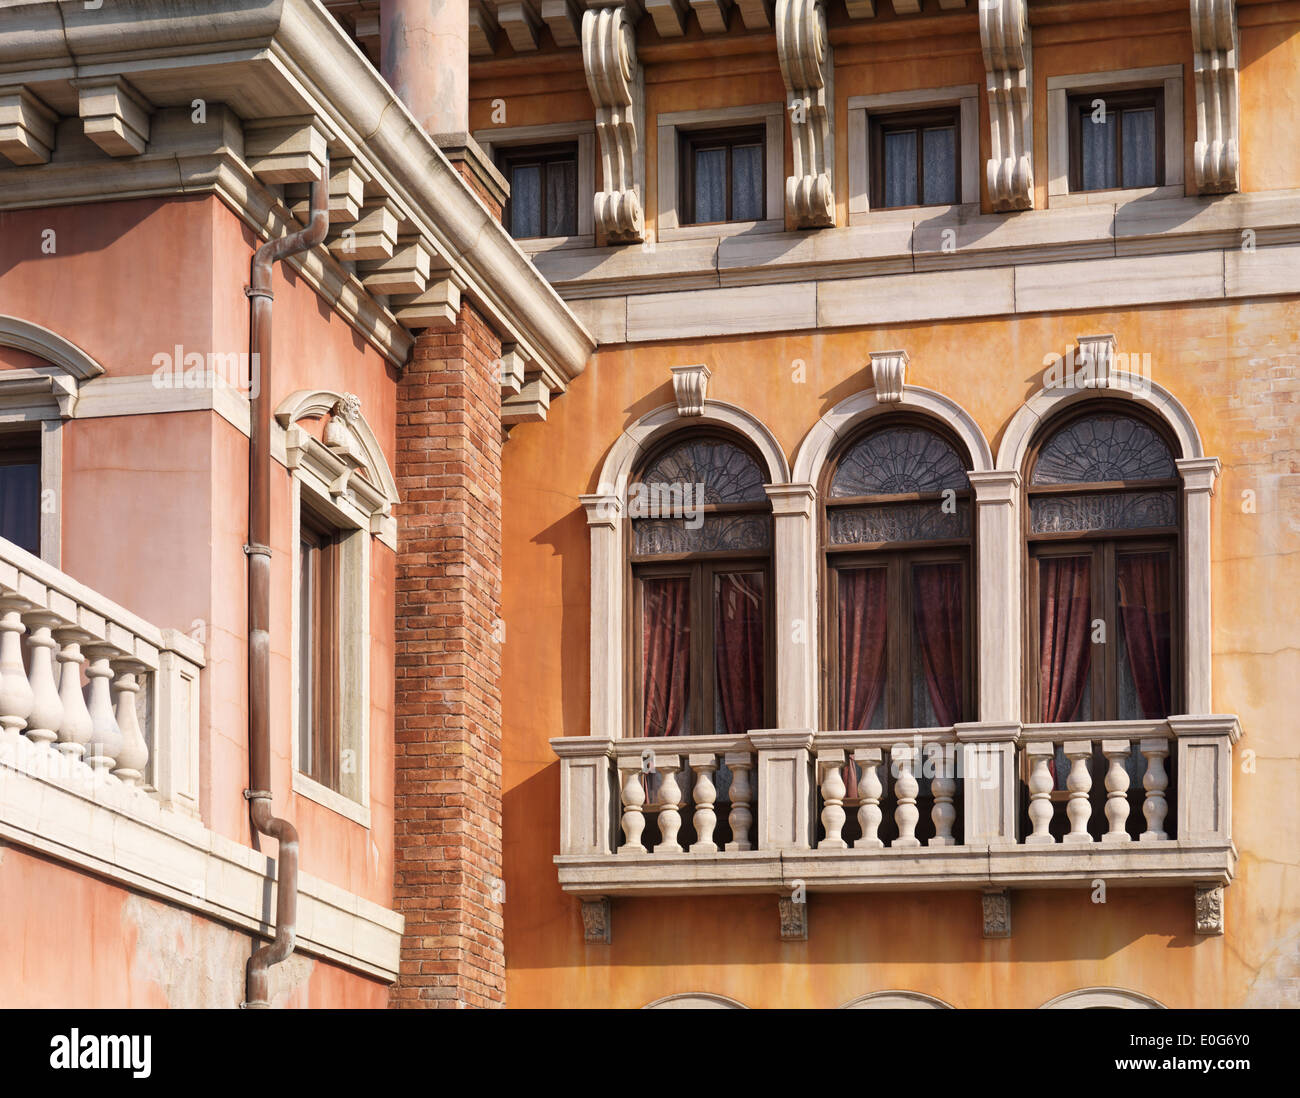 Windows of a house built in Venetian gothic architectural style Stock Photo